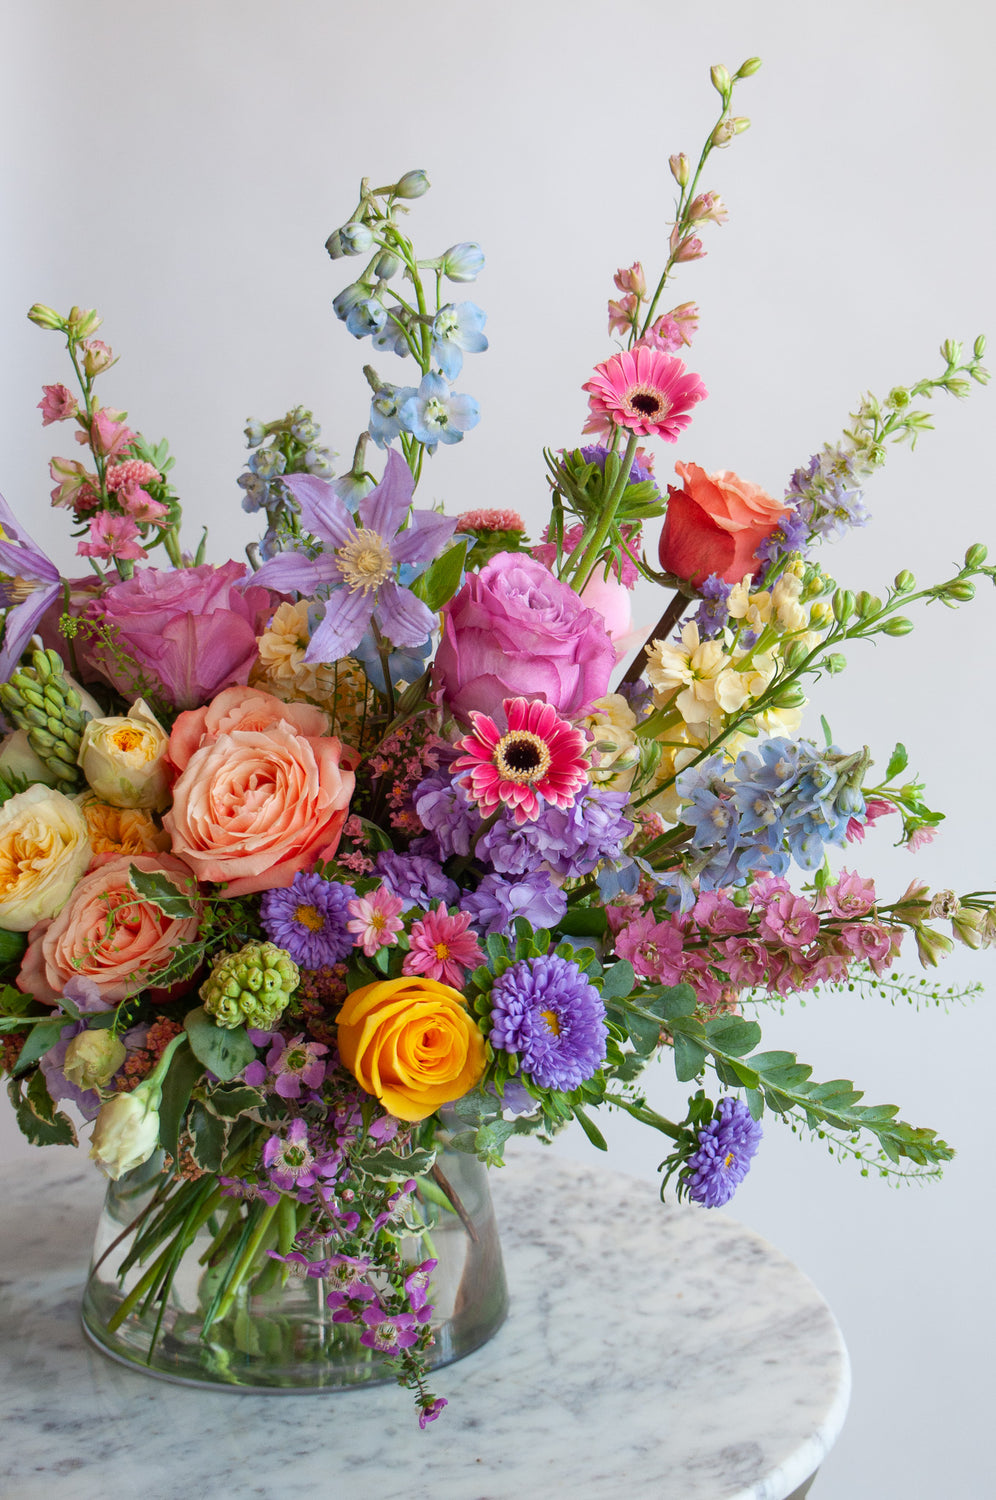 Close up of the blooms in a flower arrangement. The flowers are many colors and include roses, tulips, daisies, snapdragon, clematis, stock, hyacinth, and delphinium.